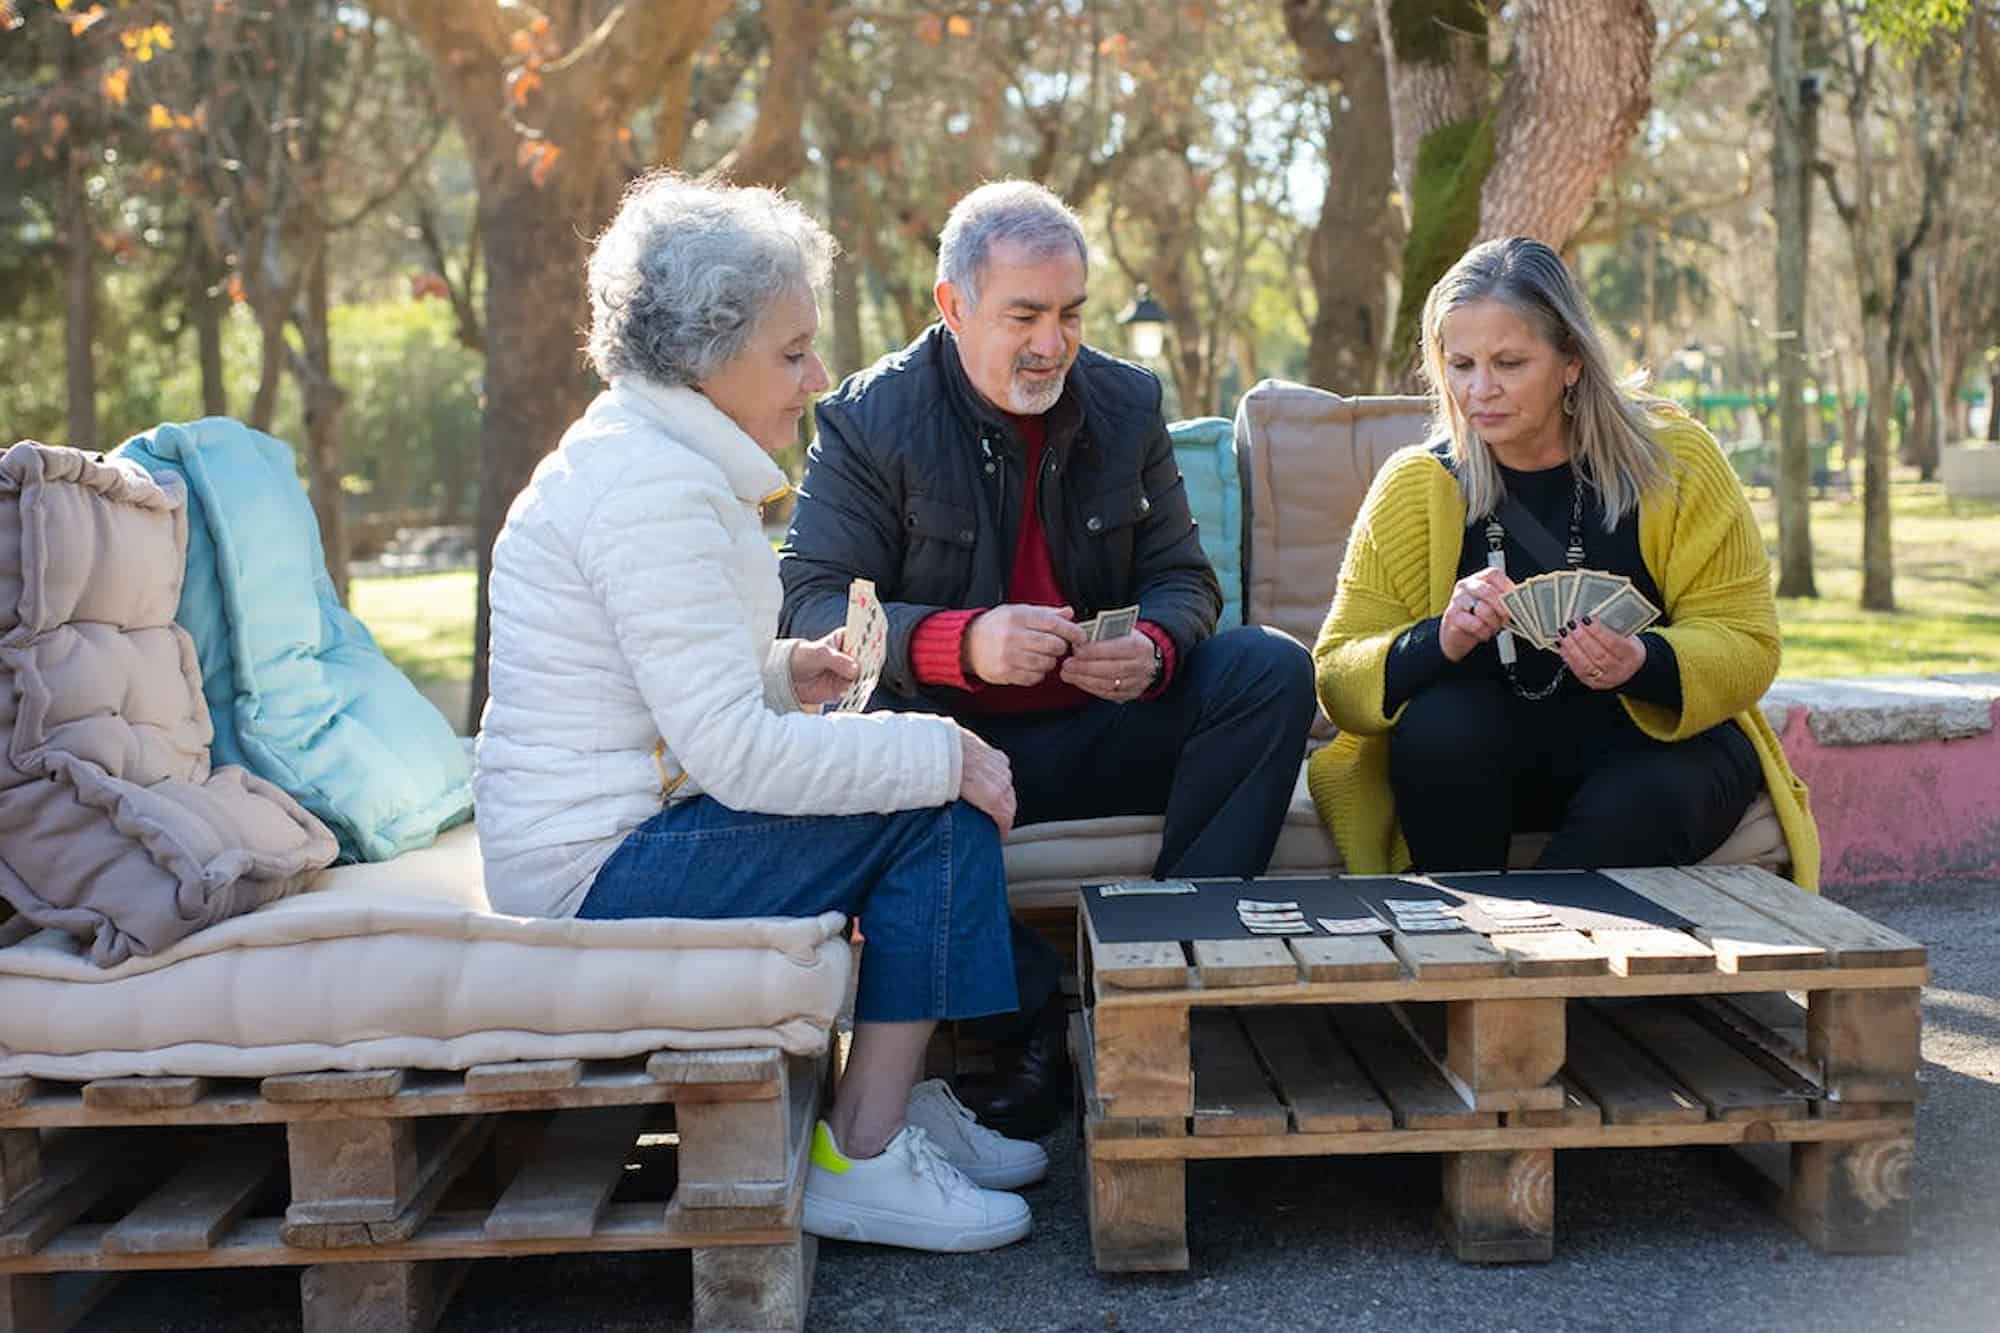 Boost Your Memory with These Top Senior Memory Games